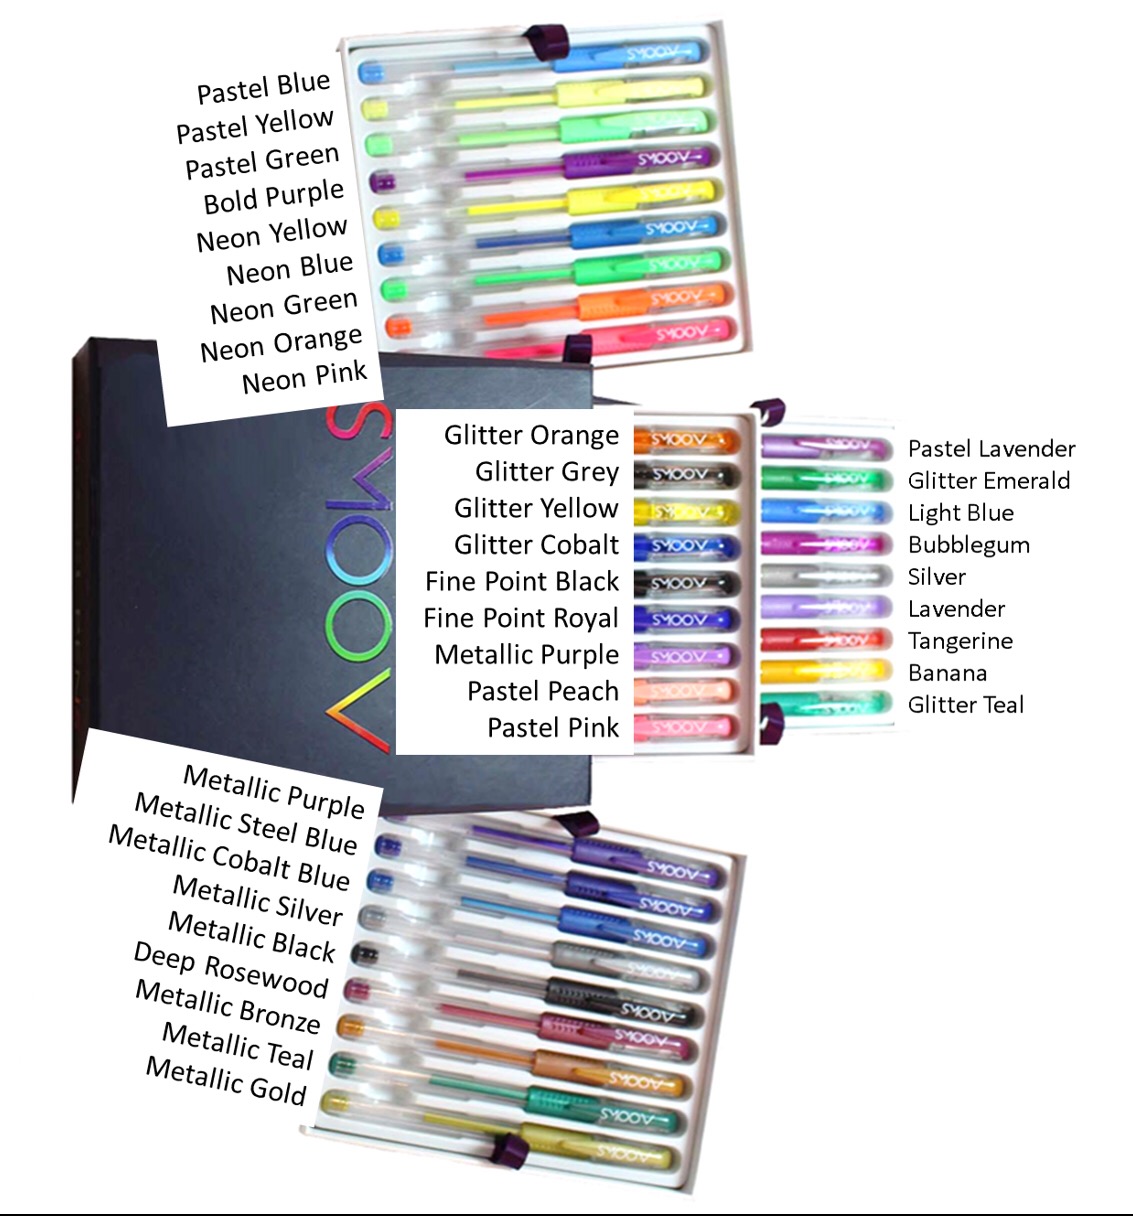 Let's try these colorful gel pens that @WRITECH sent us to review. #ad